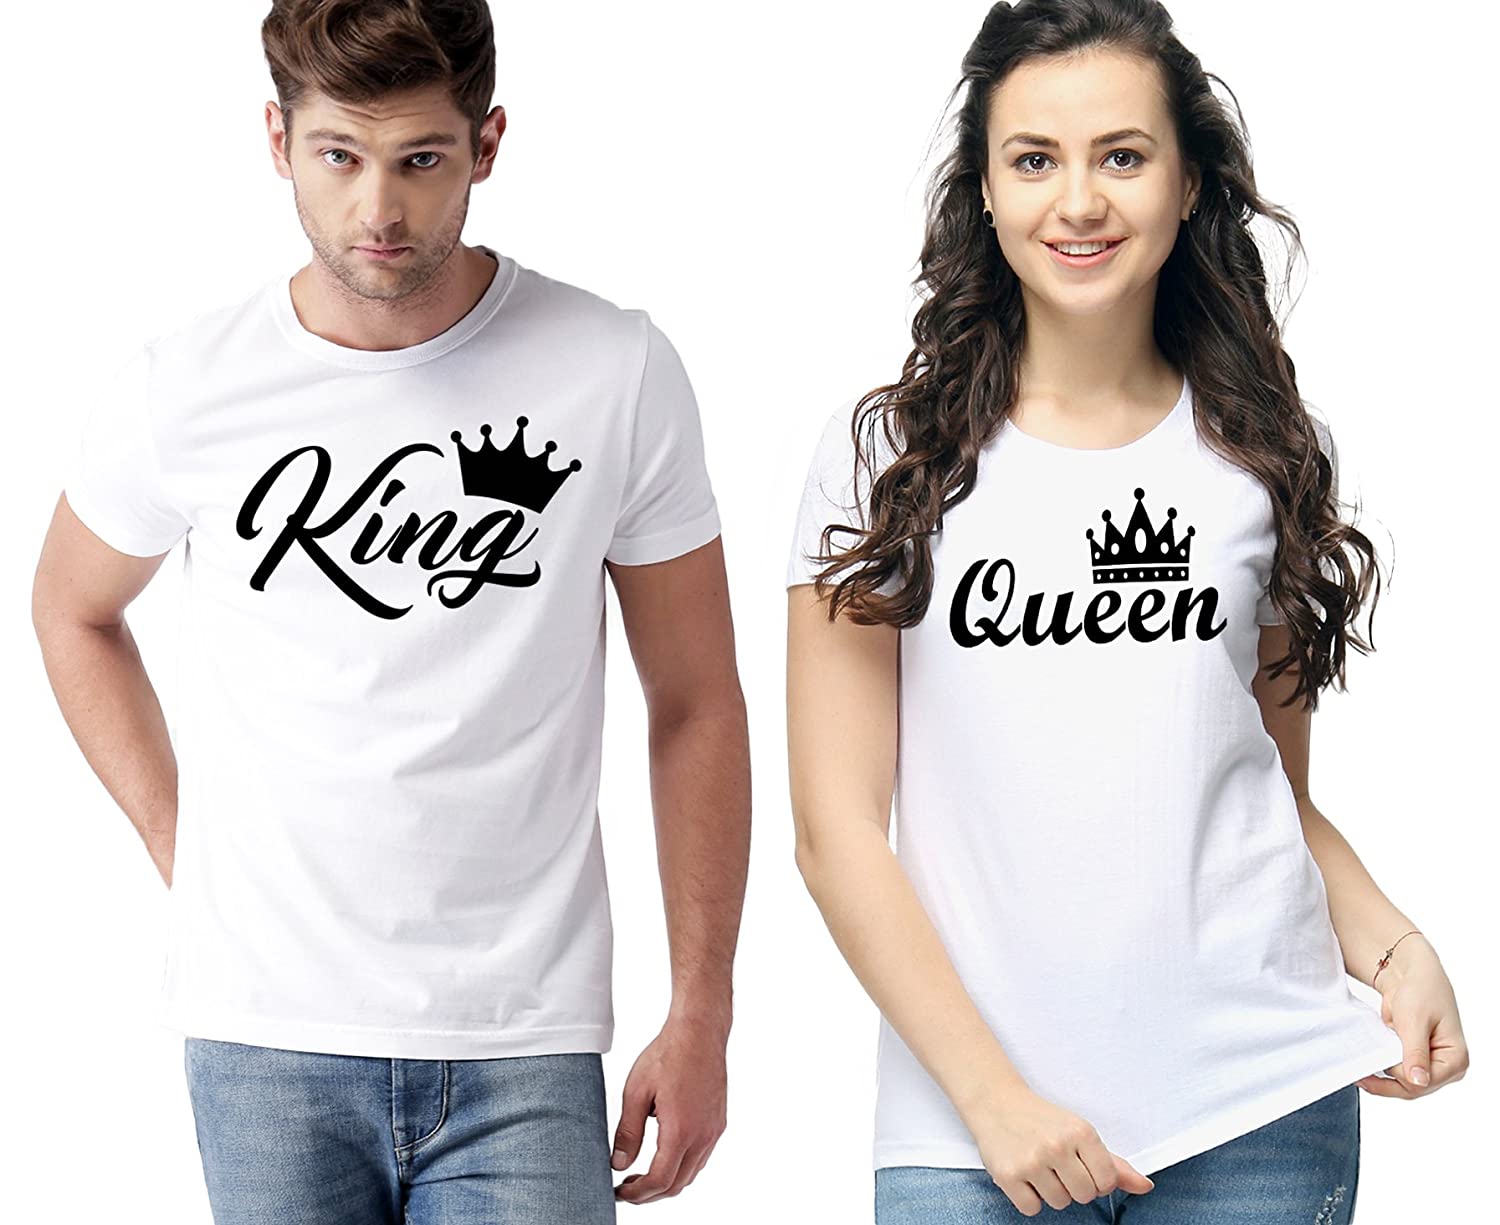 naturlig Martyr Mose King & Queen Couple Tshirt